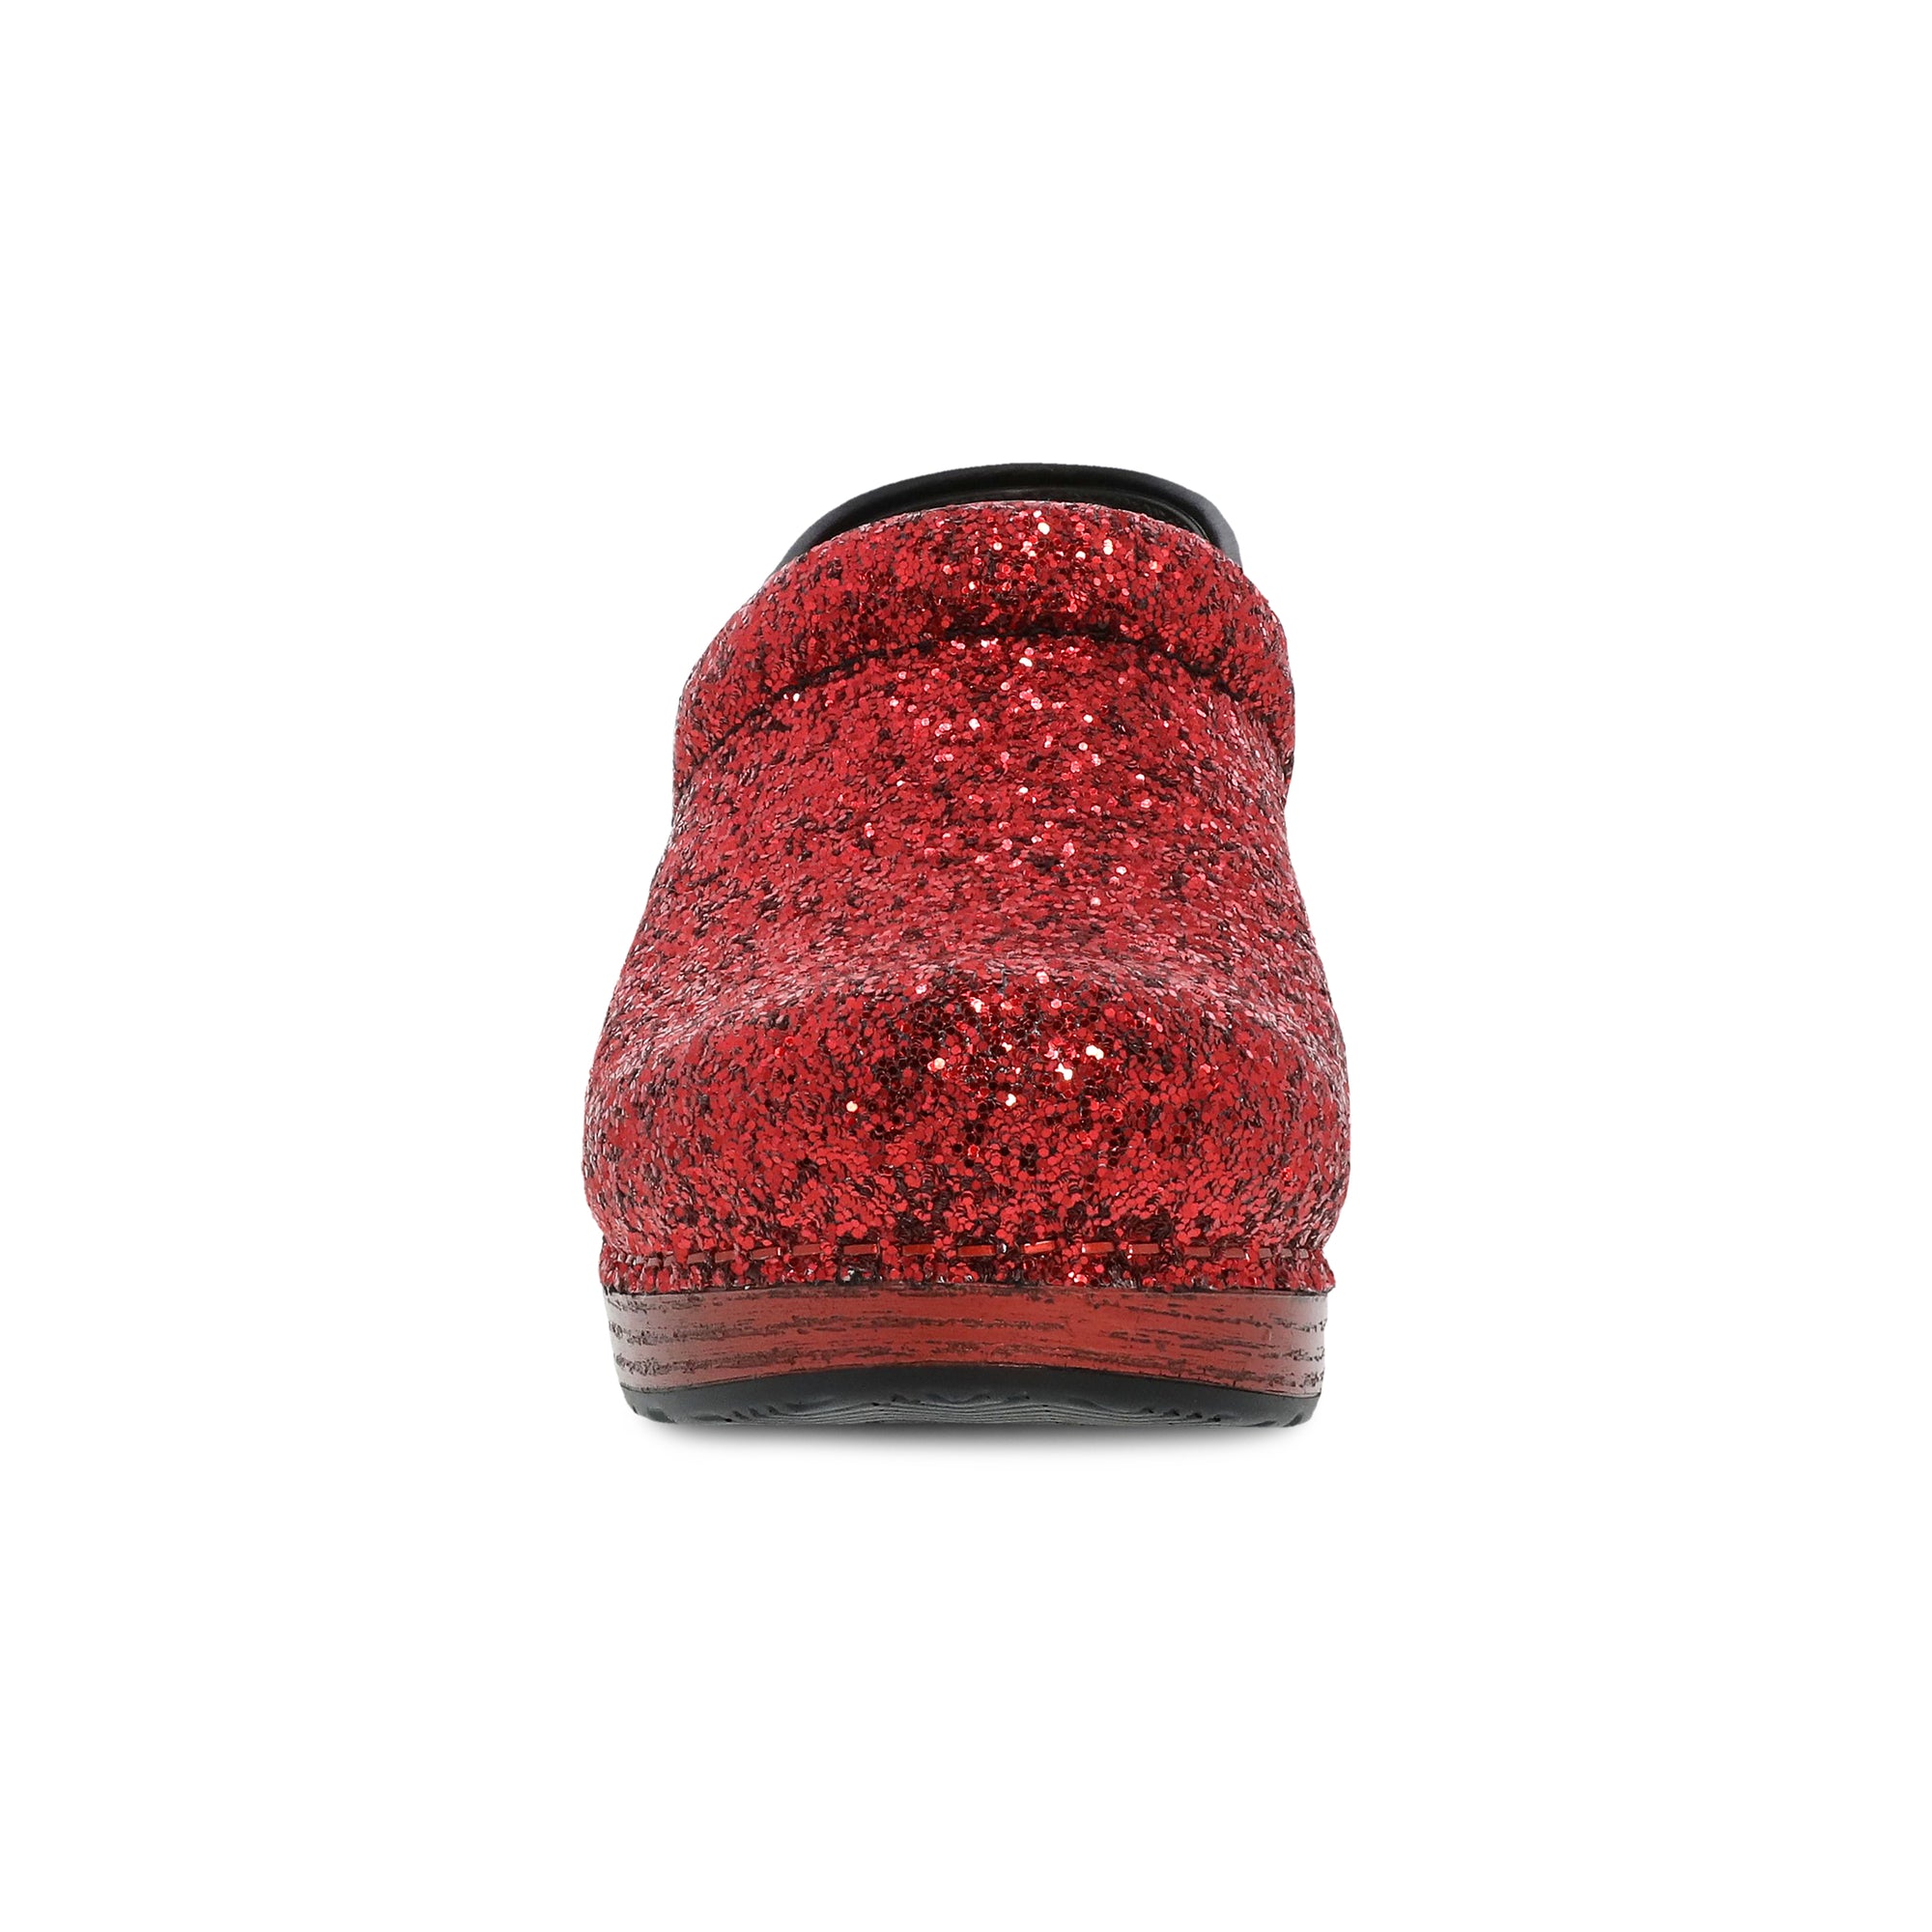 Toe image of Professional Red Glitter